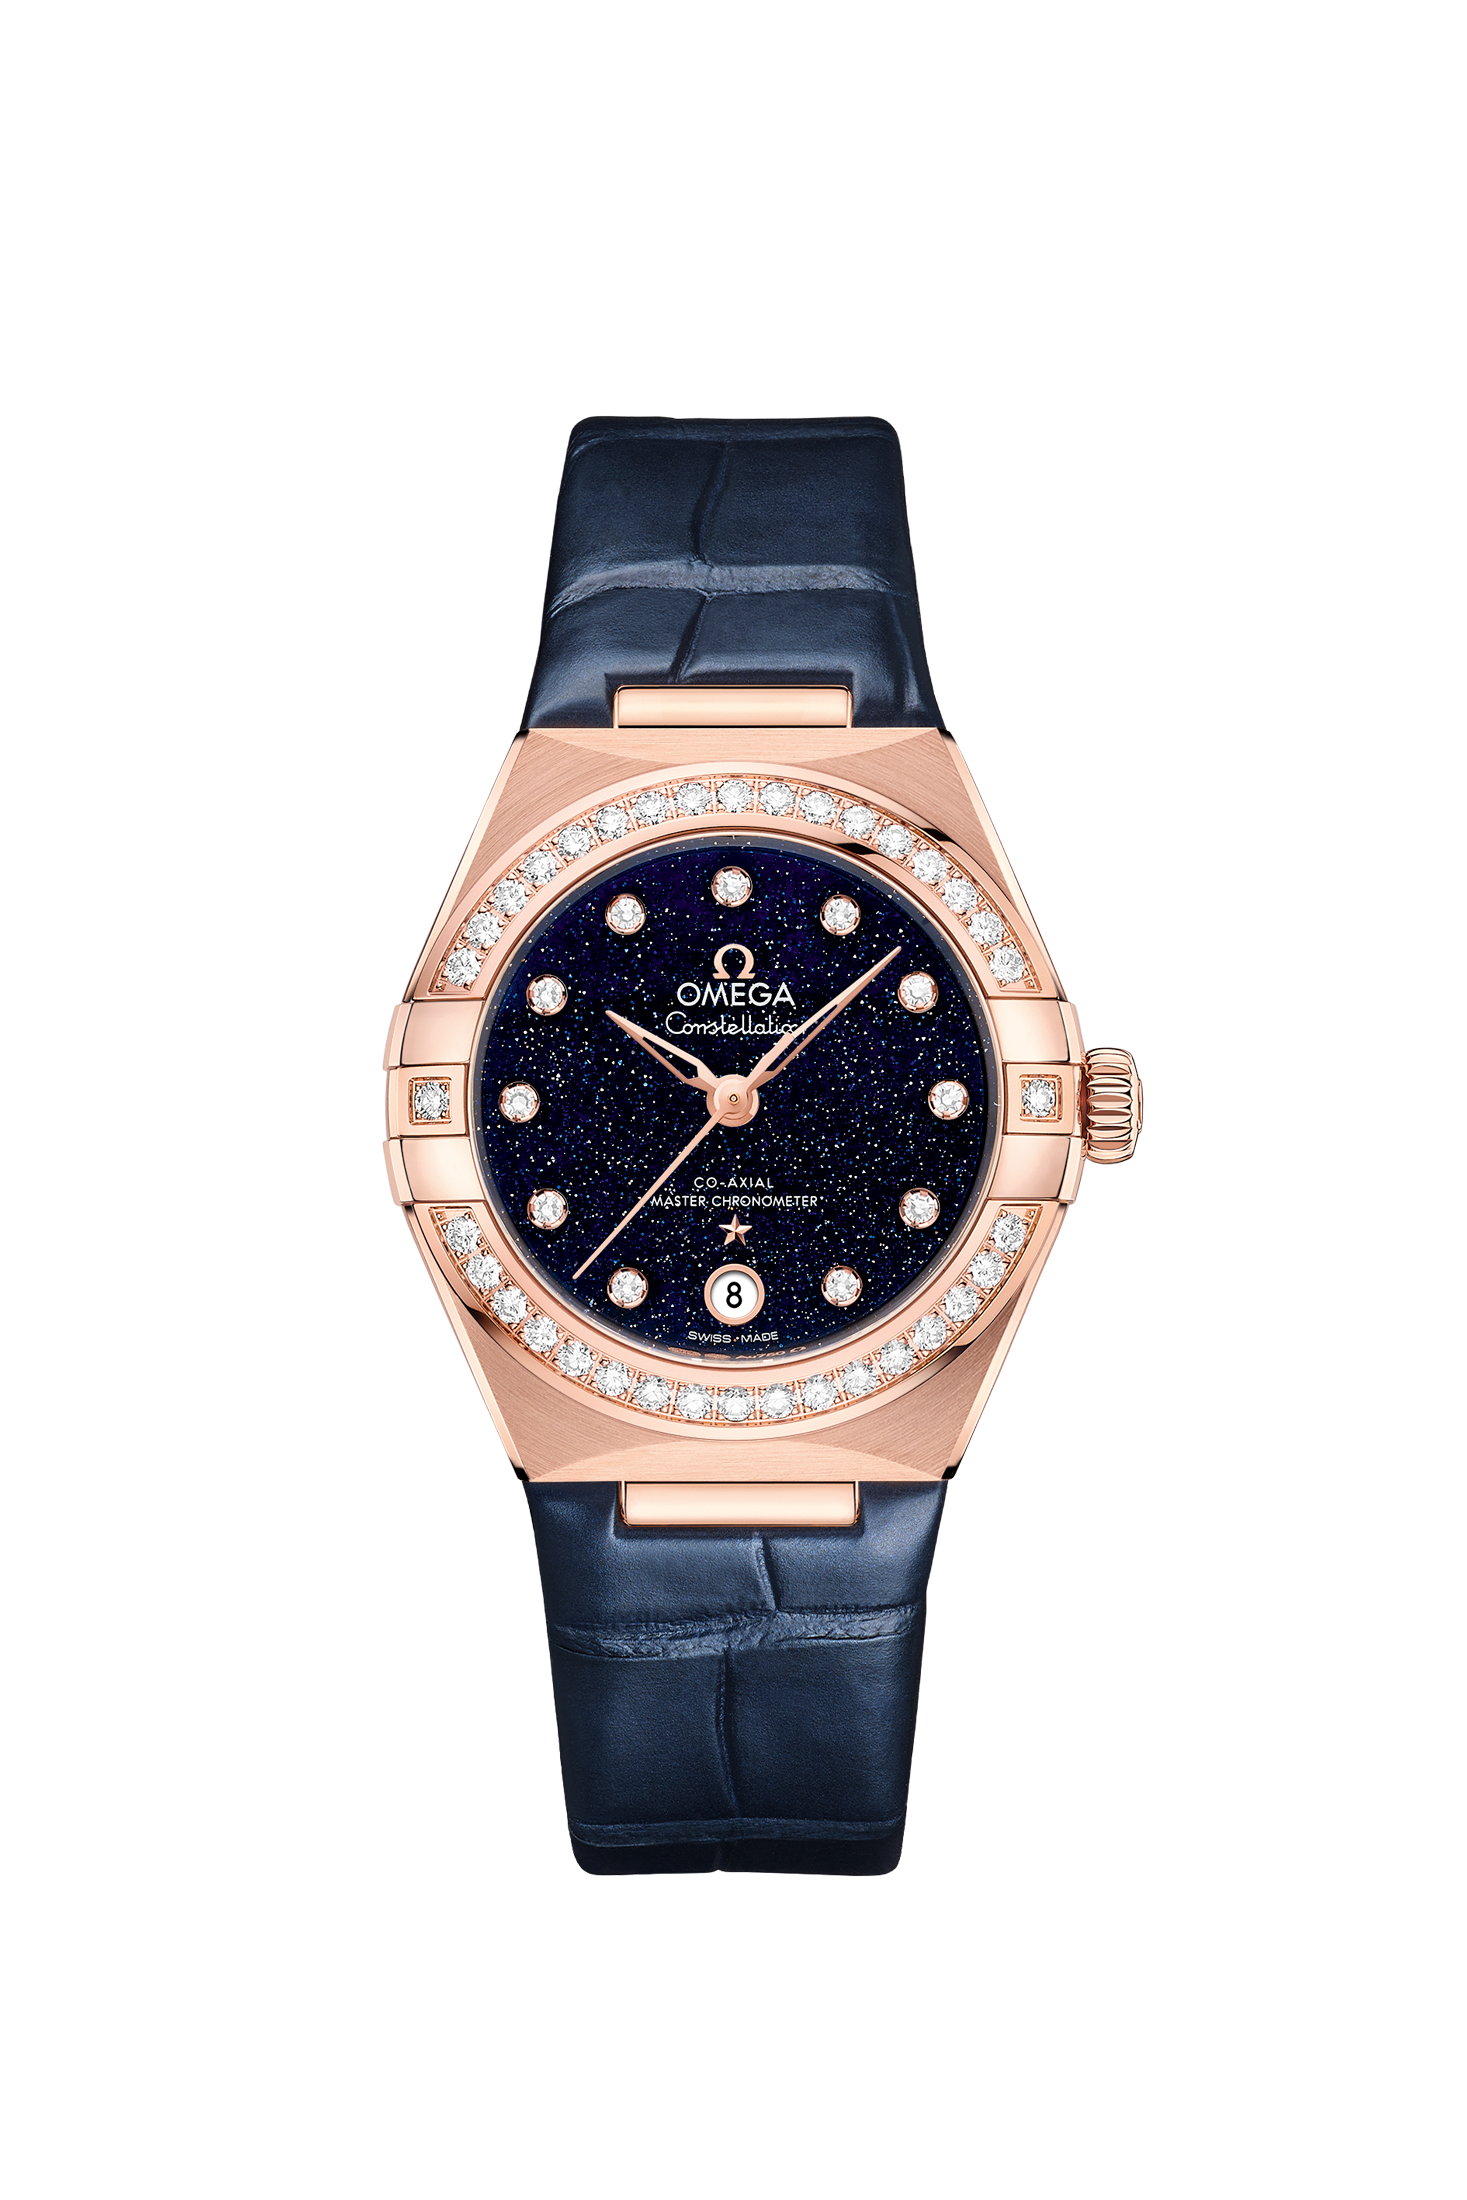 Ladies' watch  OMEGA, Constellation Co Axial Master Chronometer / 29mm, SKU: 131.58.29.20.53.003 | watchapproach.com